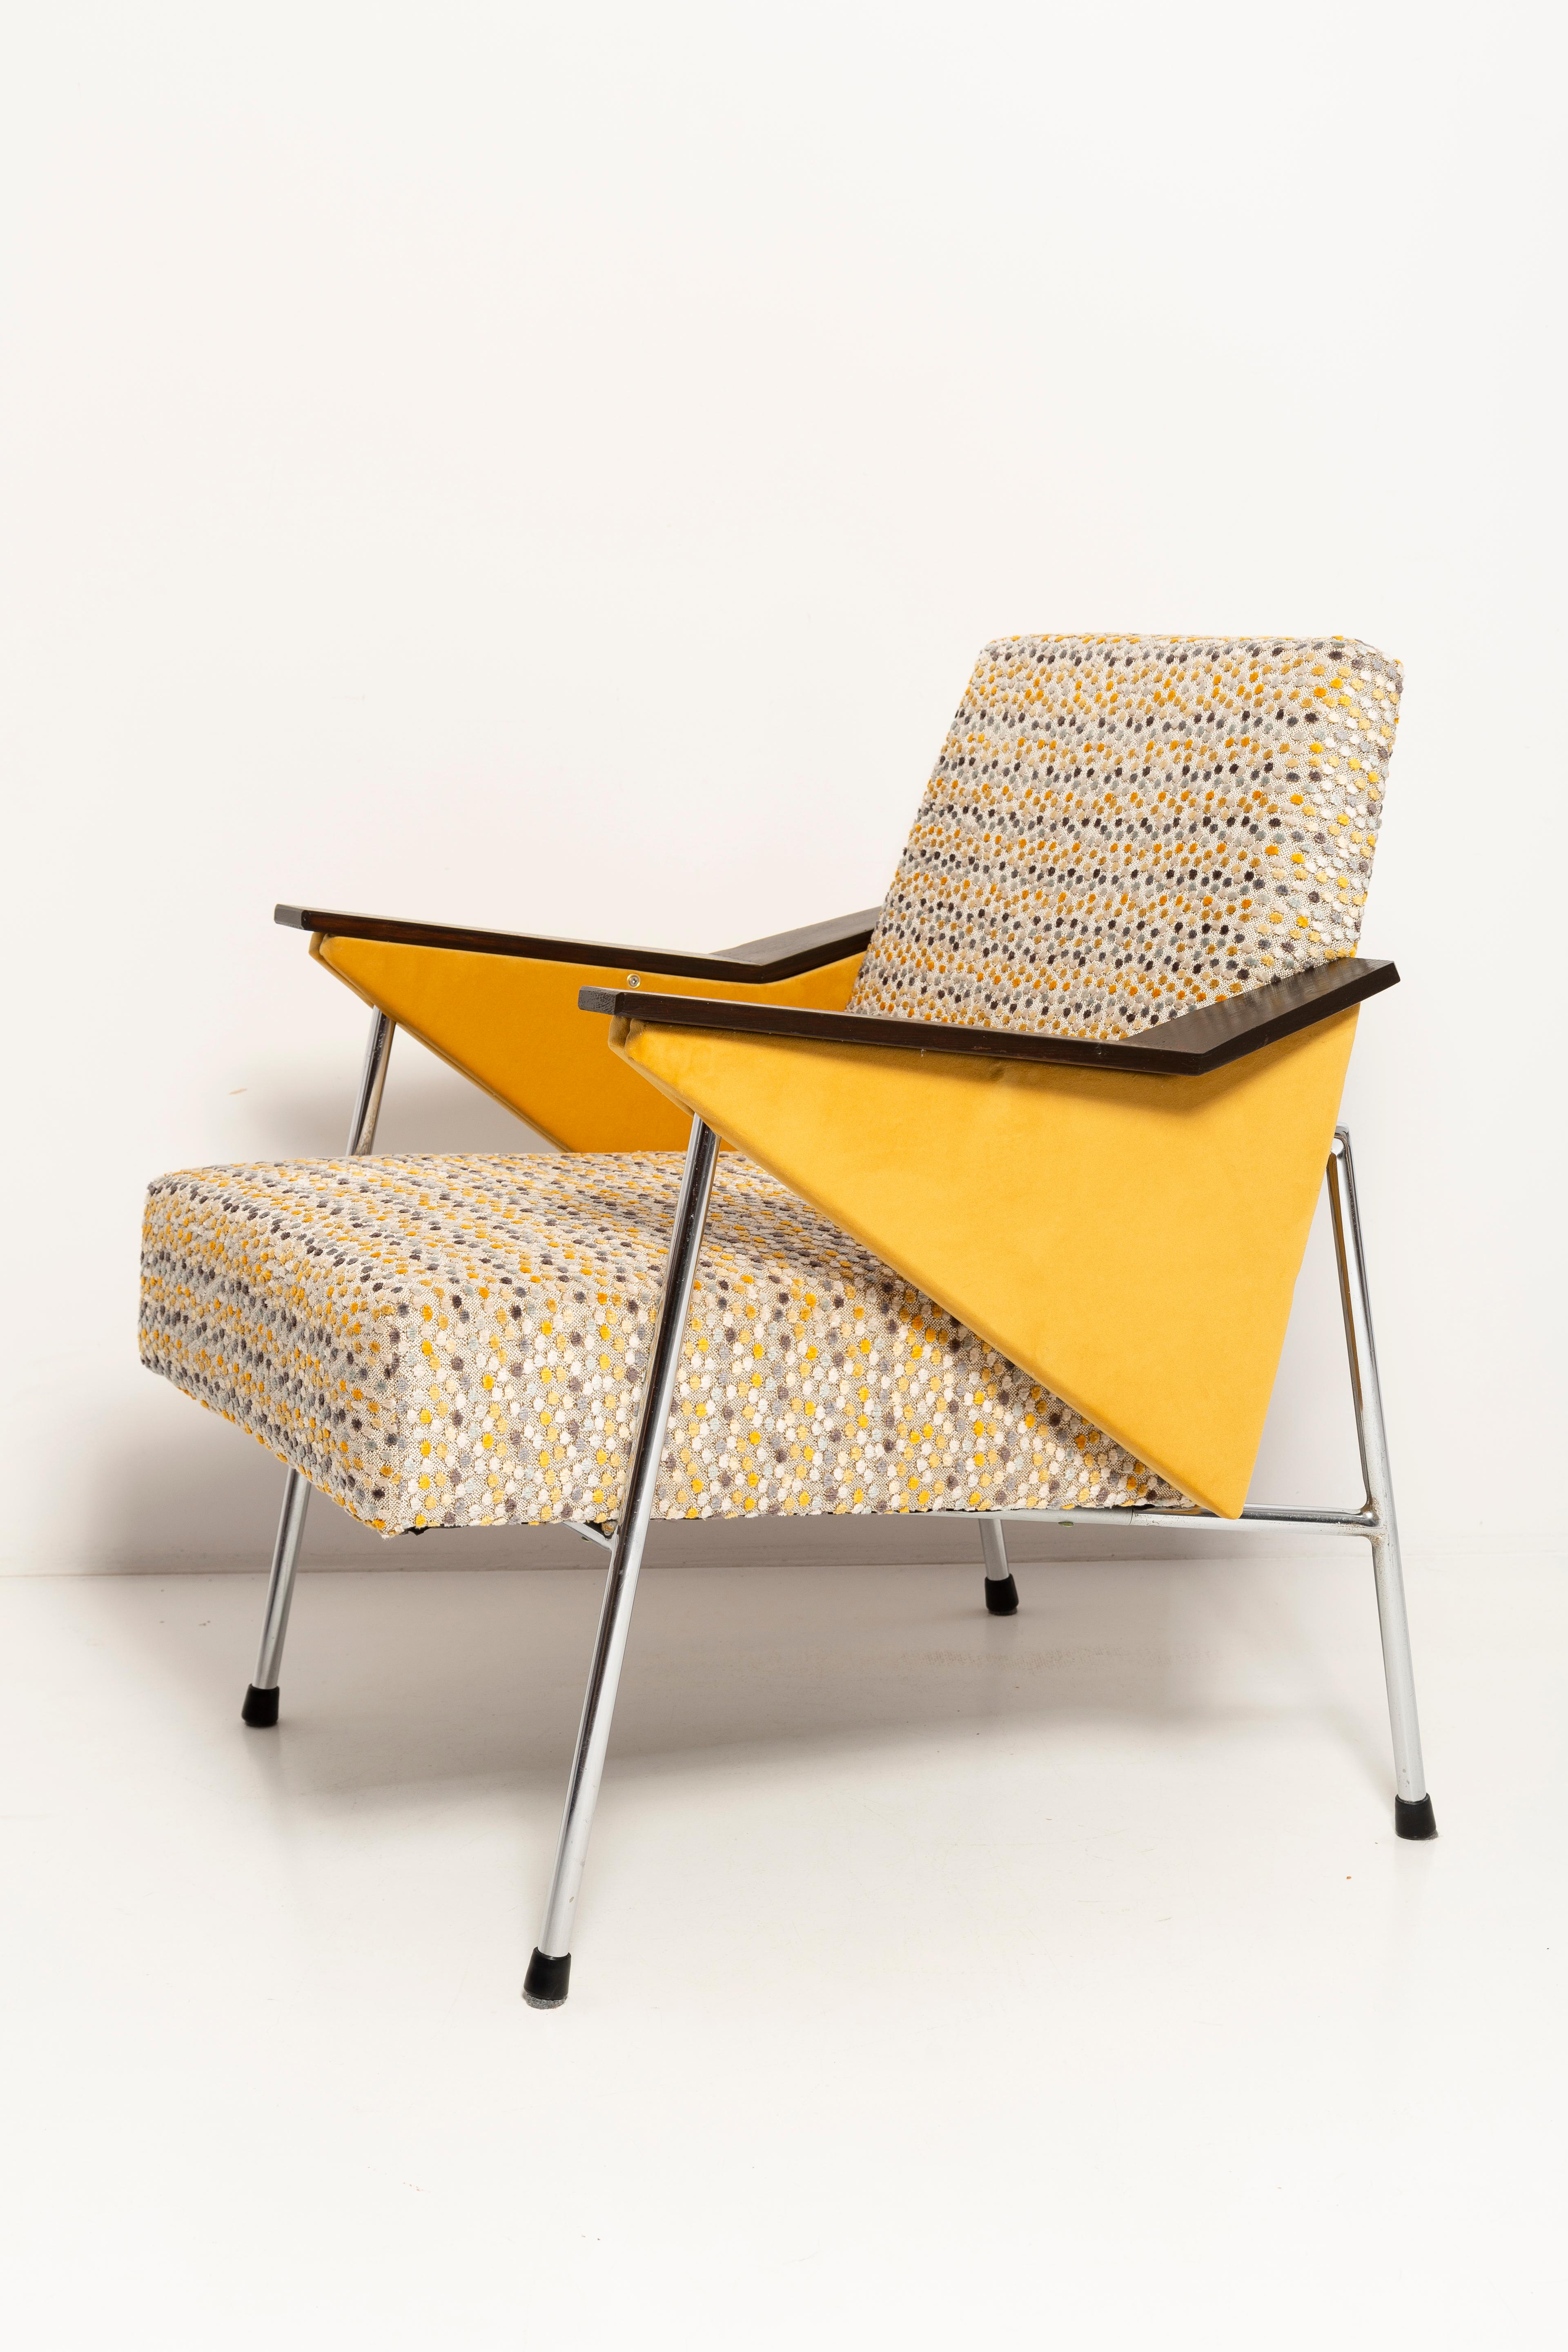 Pair of Mid Century Bat Armchairs, Yellow Dots, Bauhaus Style, Poland, 1970s. For Sale 2